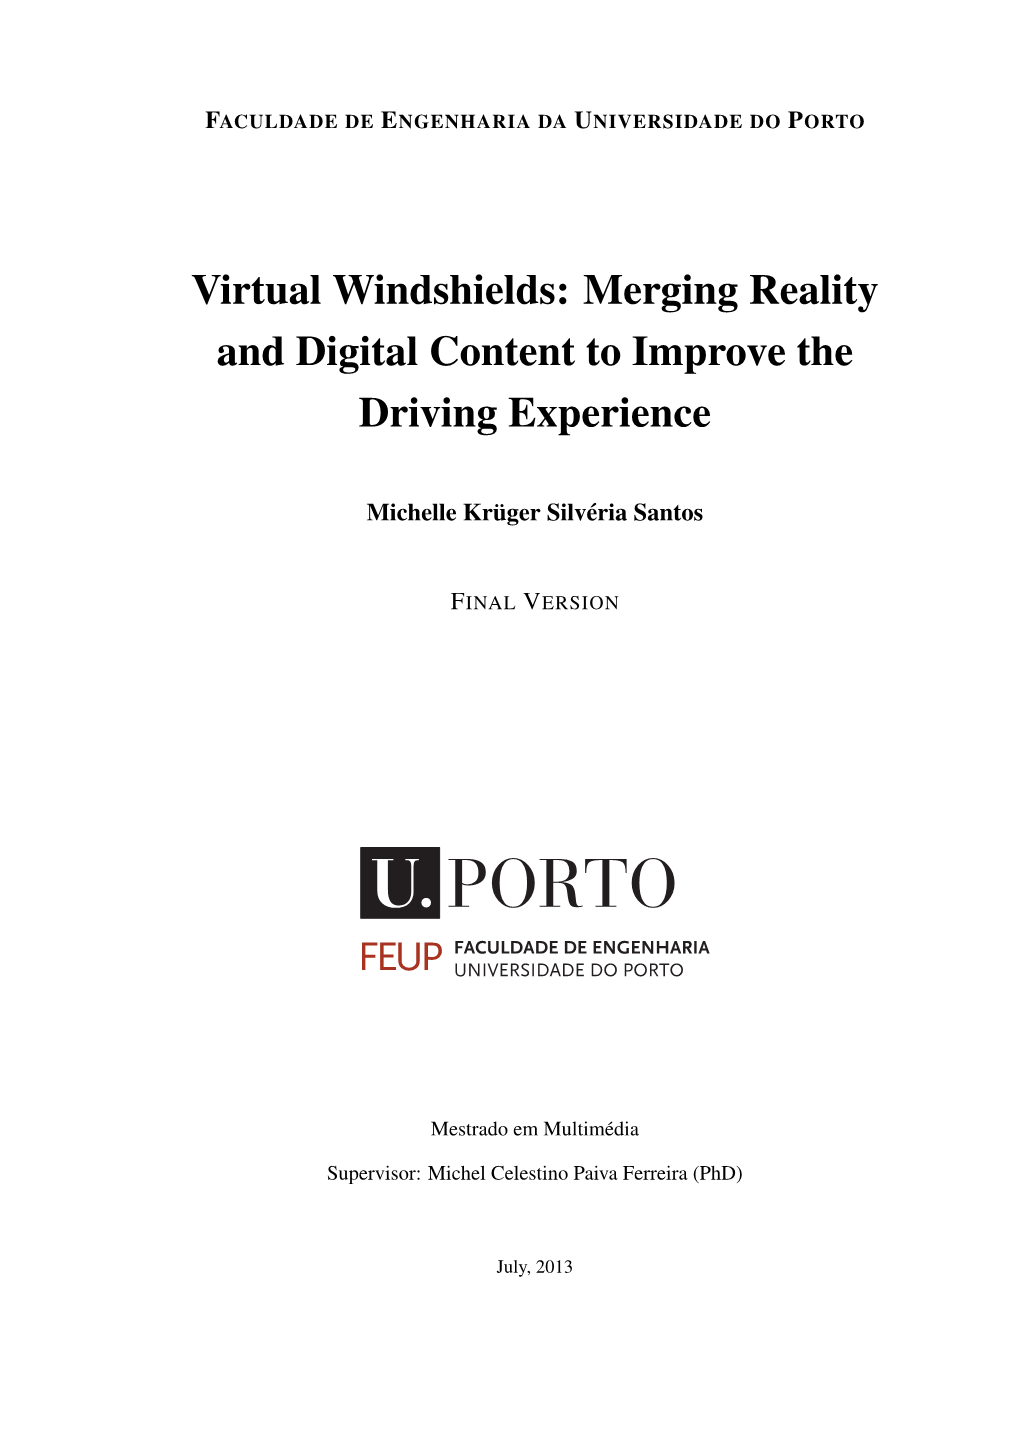 Virtual Windshields: Merging Reality and Digital Content to Improve the Driving Experience